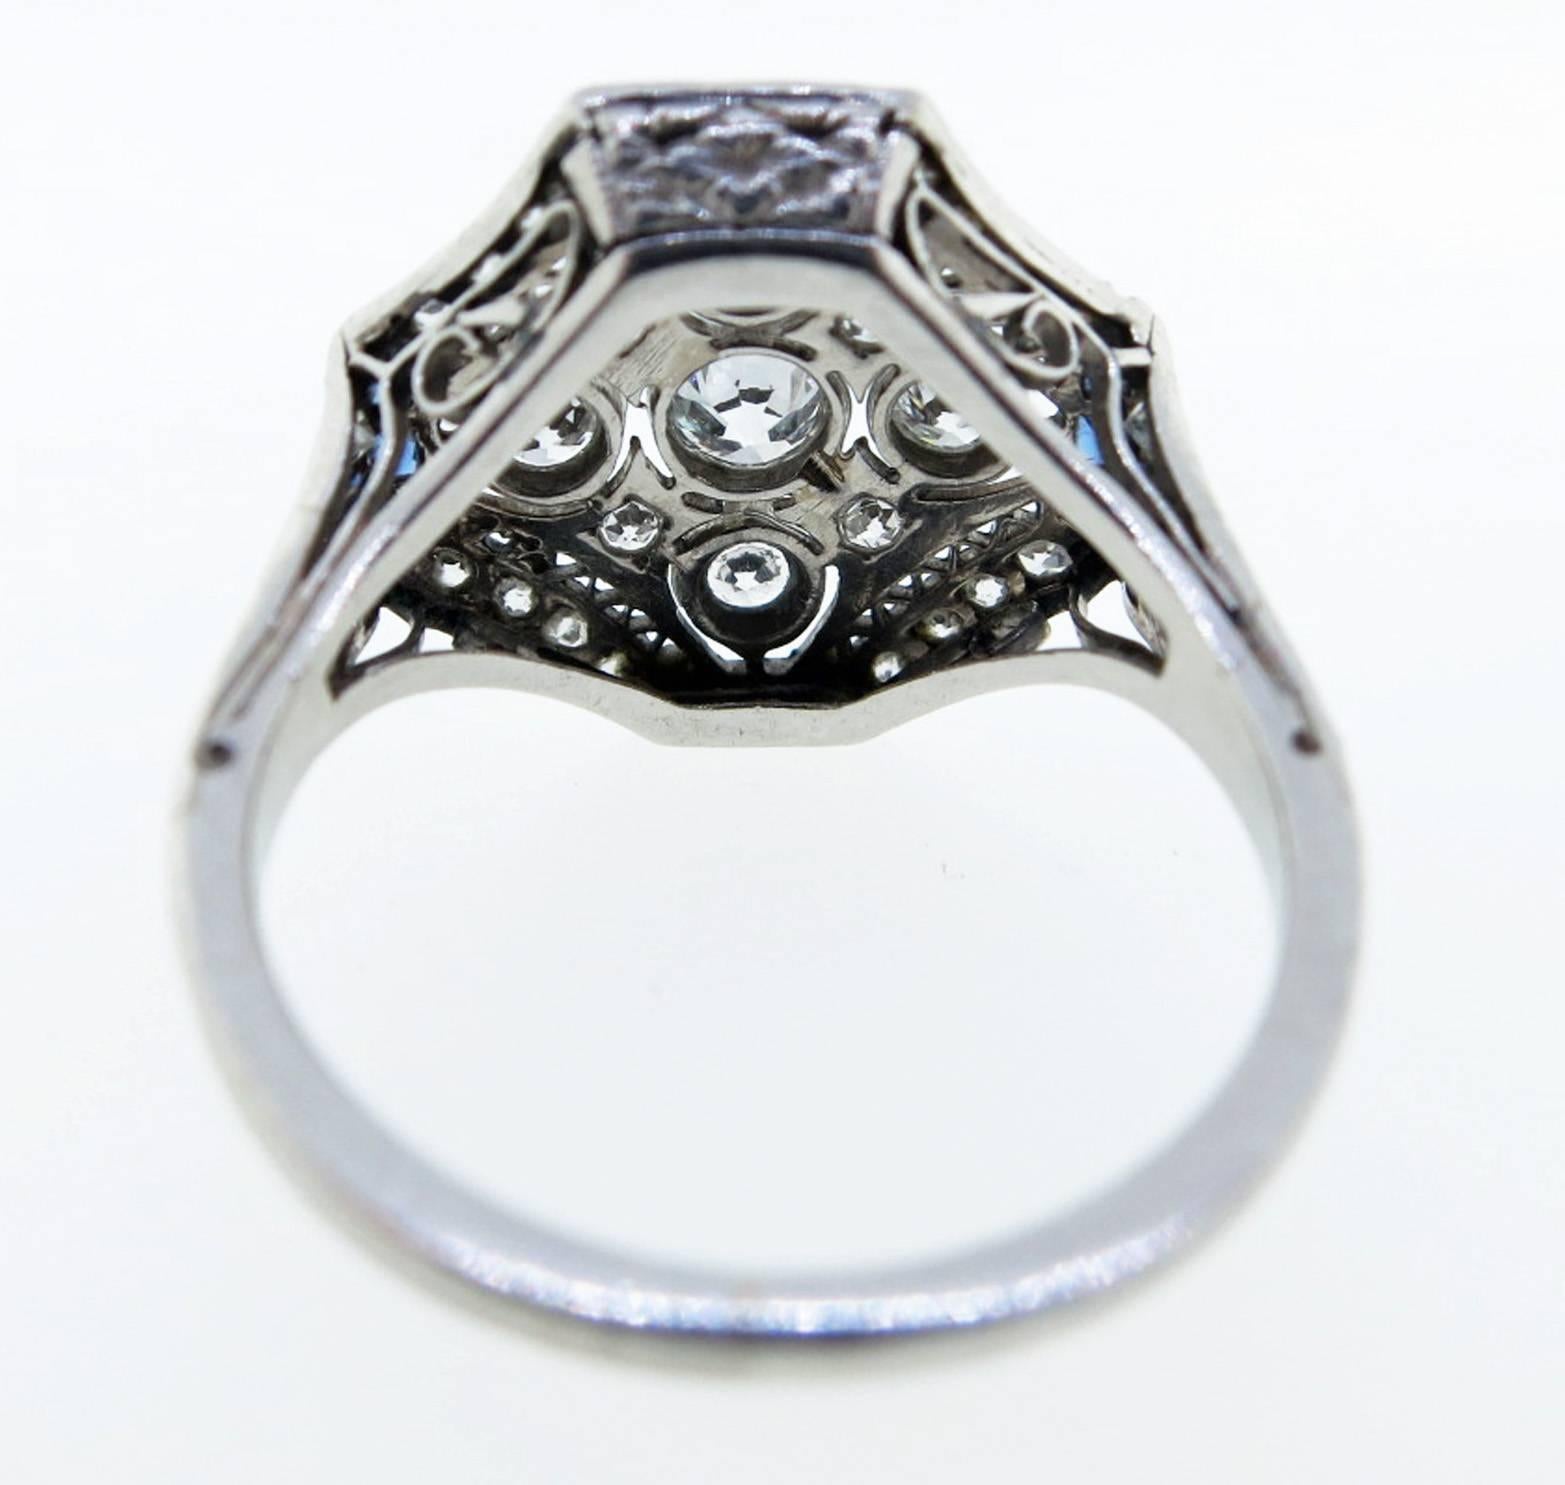 Platinum open work engraved mount ring circa 1925. The center is set with 5 bezel set round European cut diamonds totaling approx .55cts.  The handmade open lace work mount is is bead set with 20 old cut diamonds and  channel set with 12 natural